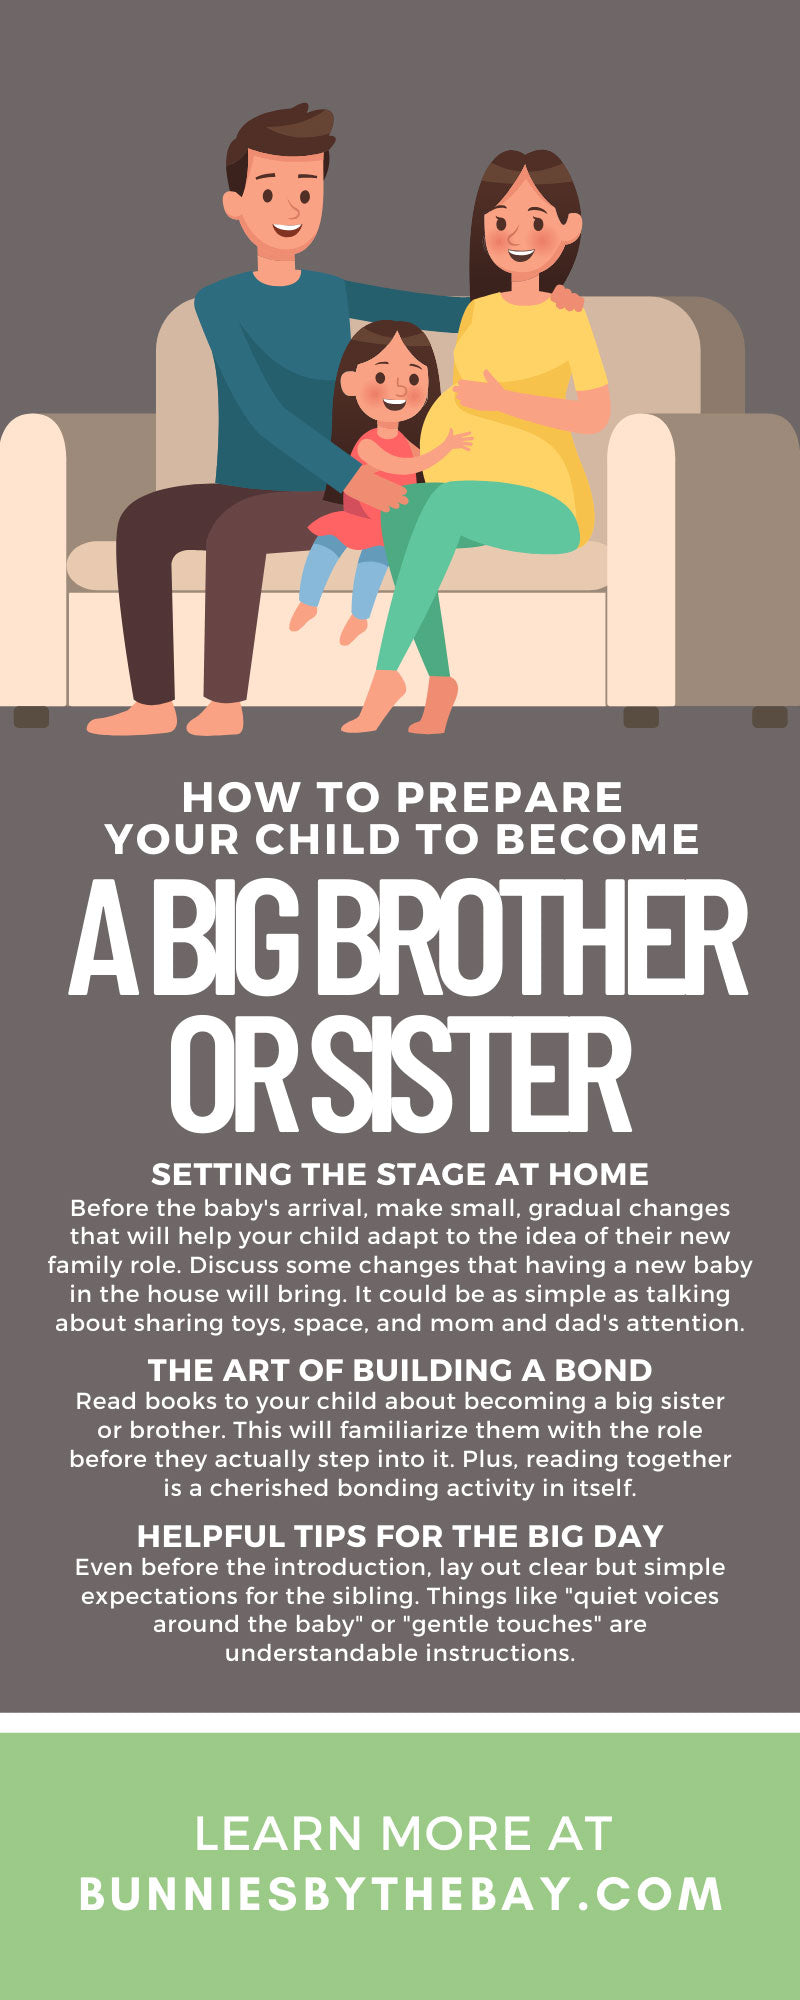 How To Prepare Your Child To Become a Big Brother or Sister